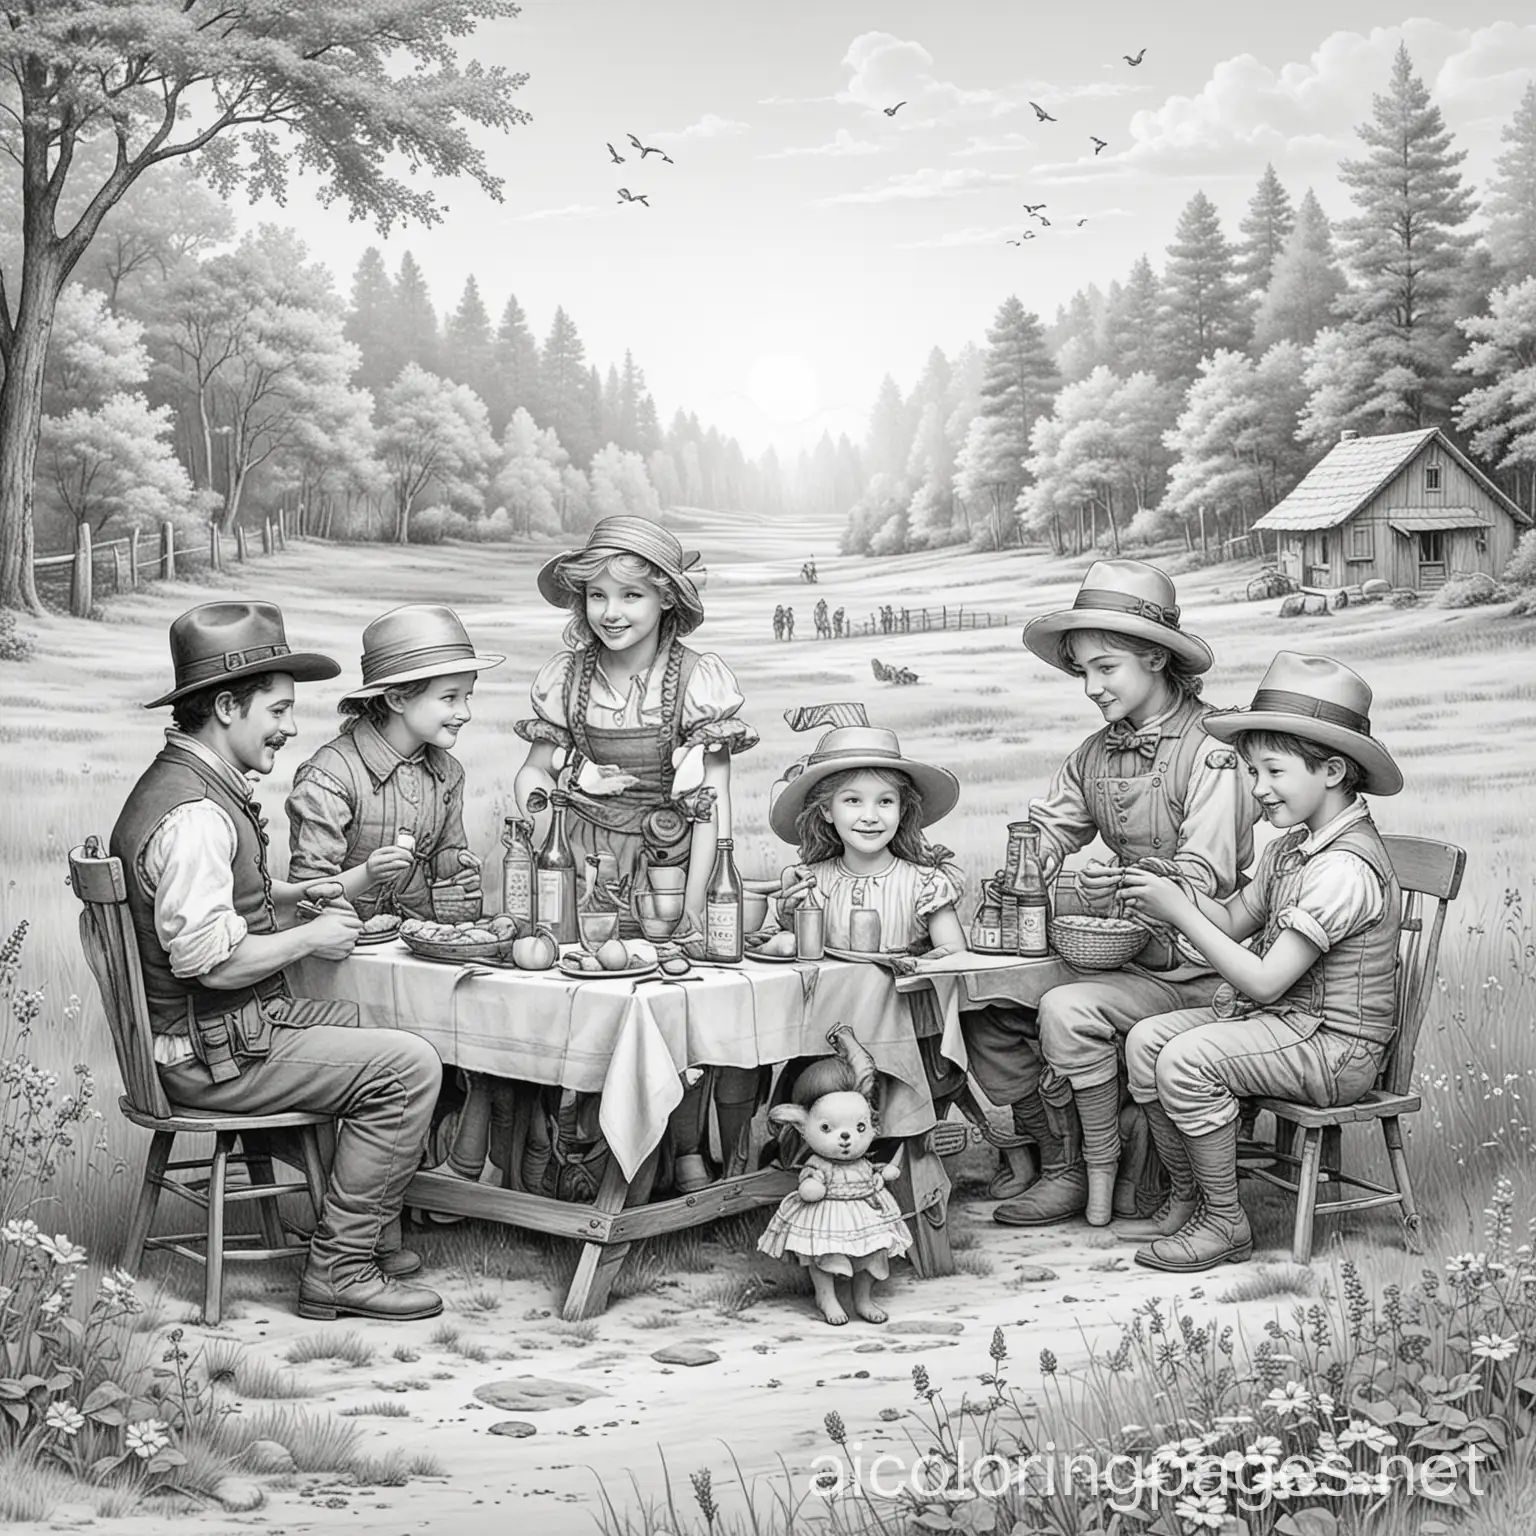 beneath a bright july sun, friends and family all enjoy a 4th of july picninic, Jean-Baptiste Monge style, Coloring Page, black and white, line art, white background, Simplicity, Ample White Space. The background of the coloring page is plain white to make it easy for young children to color within the lines. The outlines of all the subjects are easy to distinguish, making it simple for kids to color without too much difficulty, Coloring Page, black and white, line art, white background, Simplicity, Ample White Space. The background of the coloring page is plain white to make it easy for young children to color within the lines. The outlines of all the subjects are easy to distinguish, making it simple for kids to color without too much difficulty